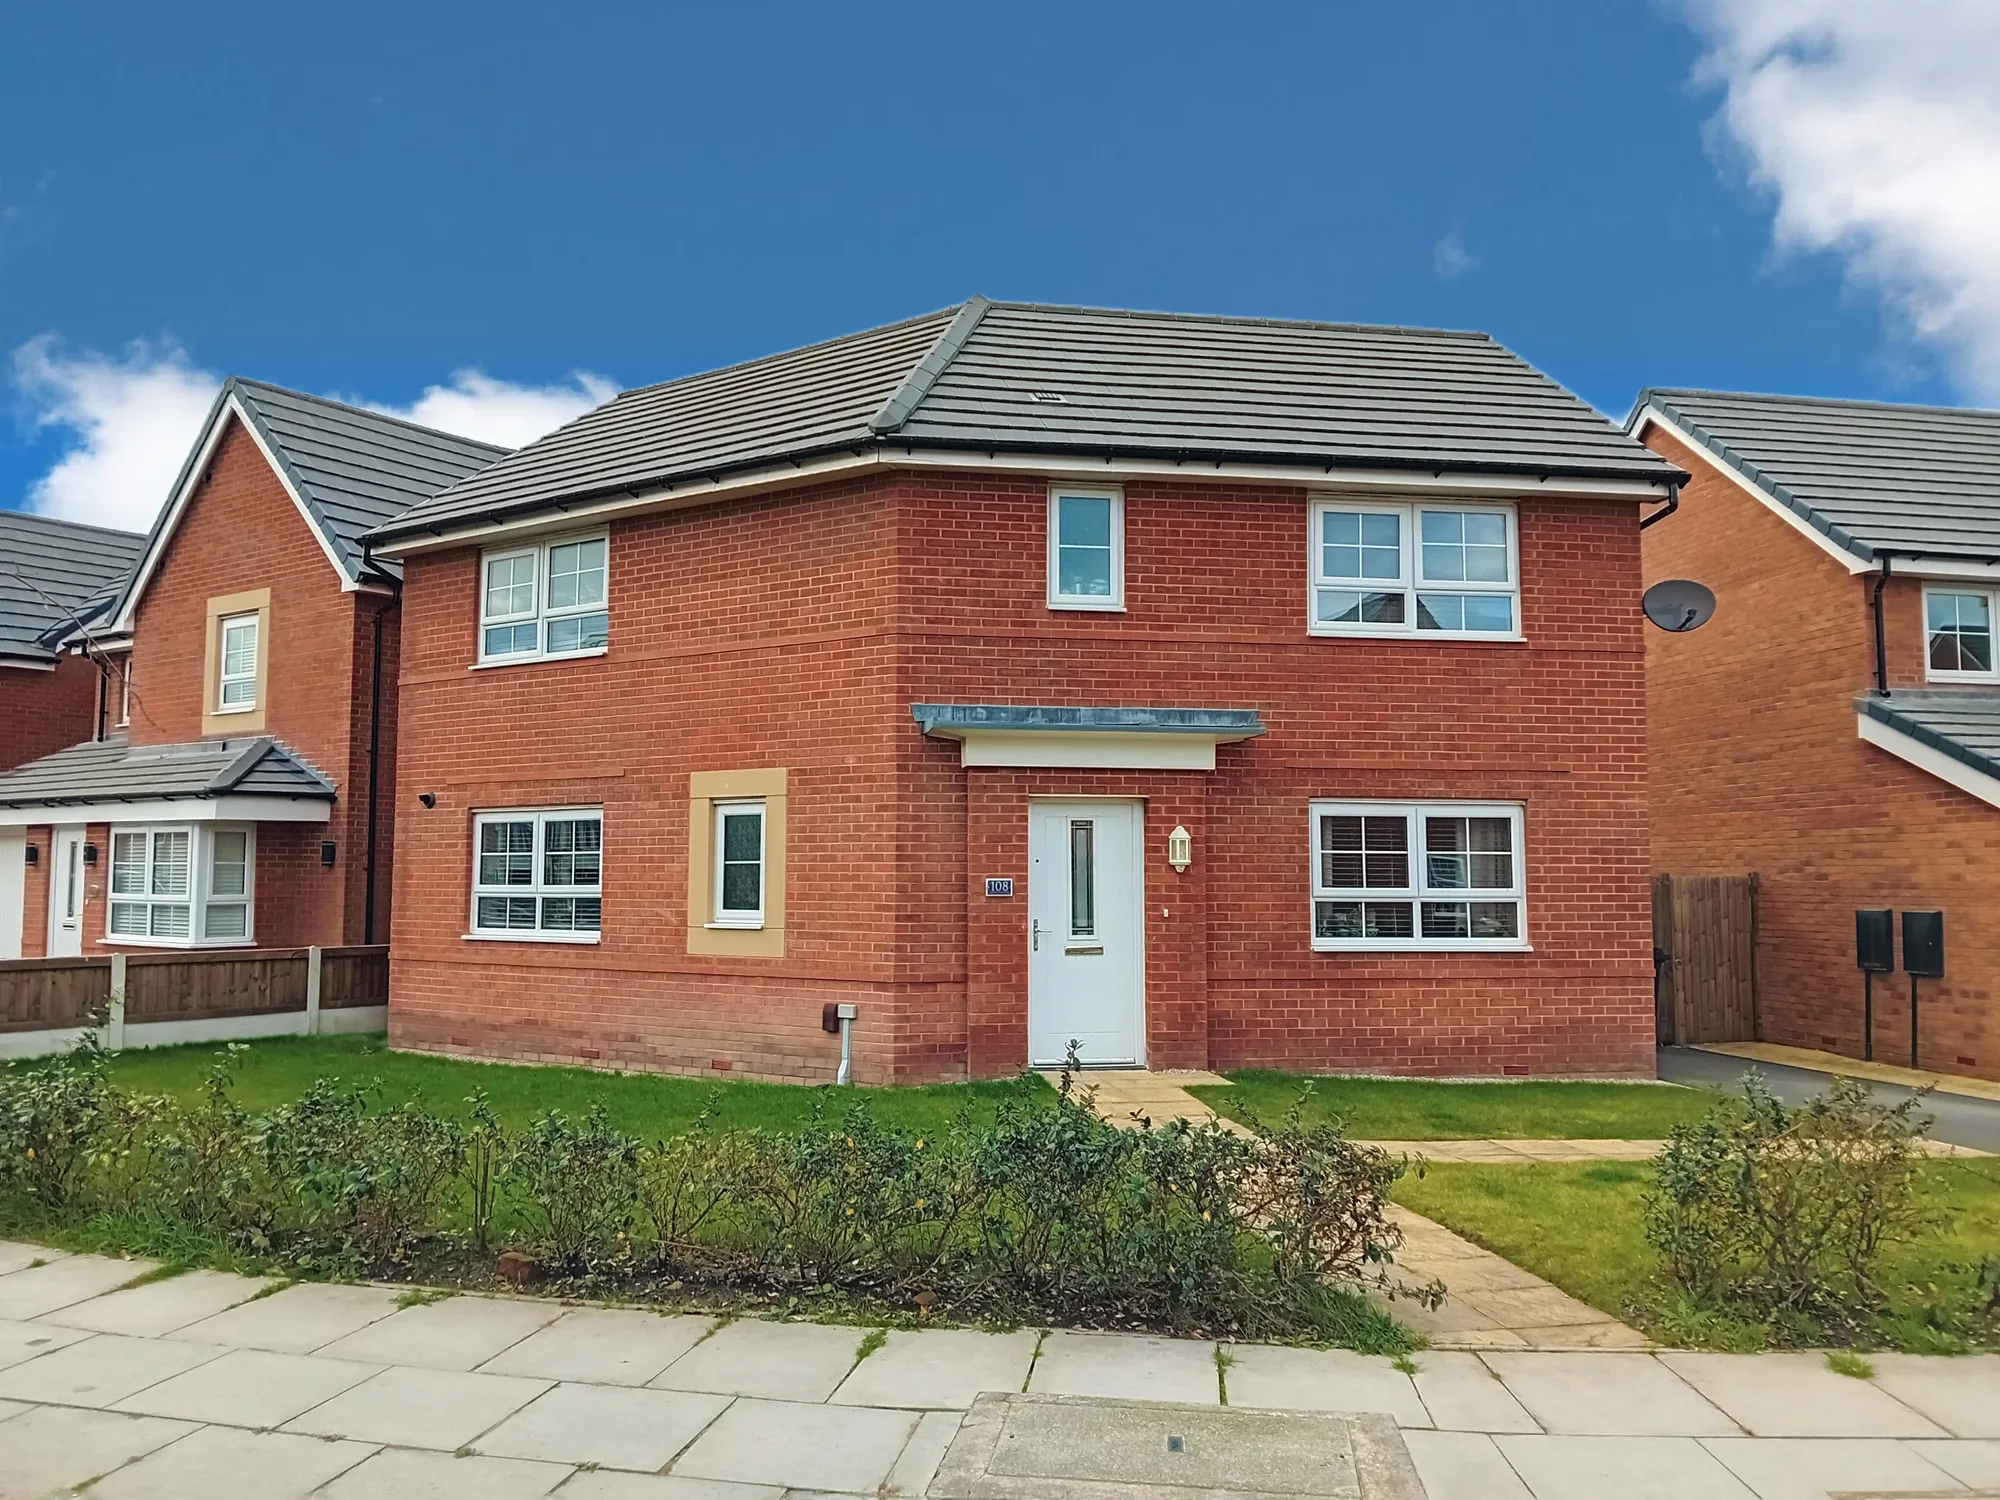 3 bed detached house for sale in Blowick Moss Lane, Southport - Property Image 1